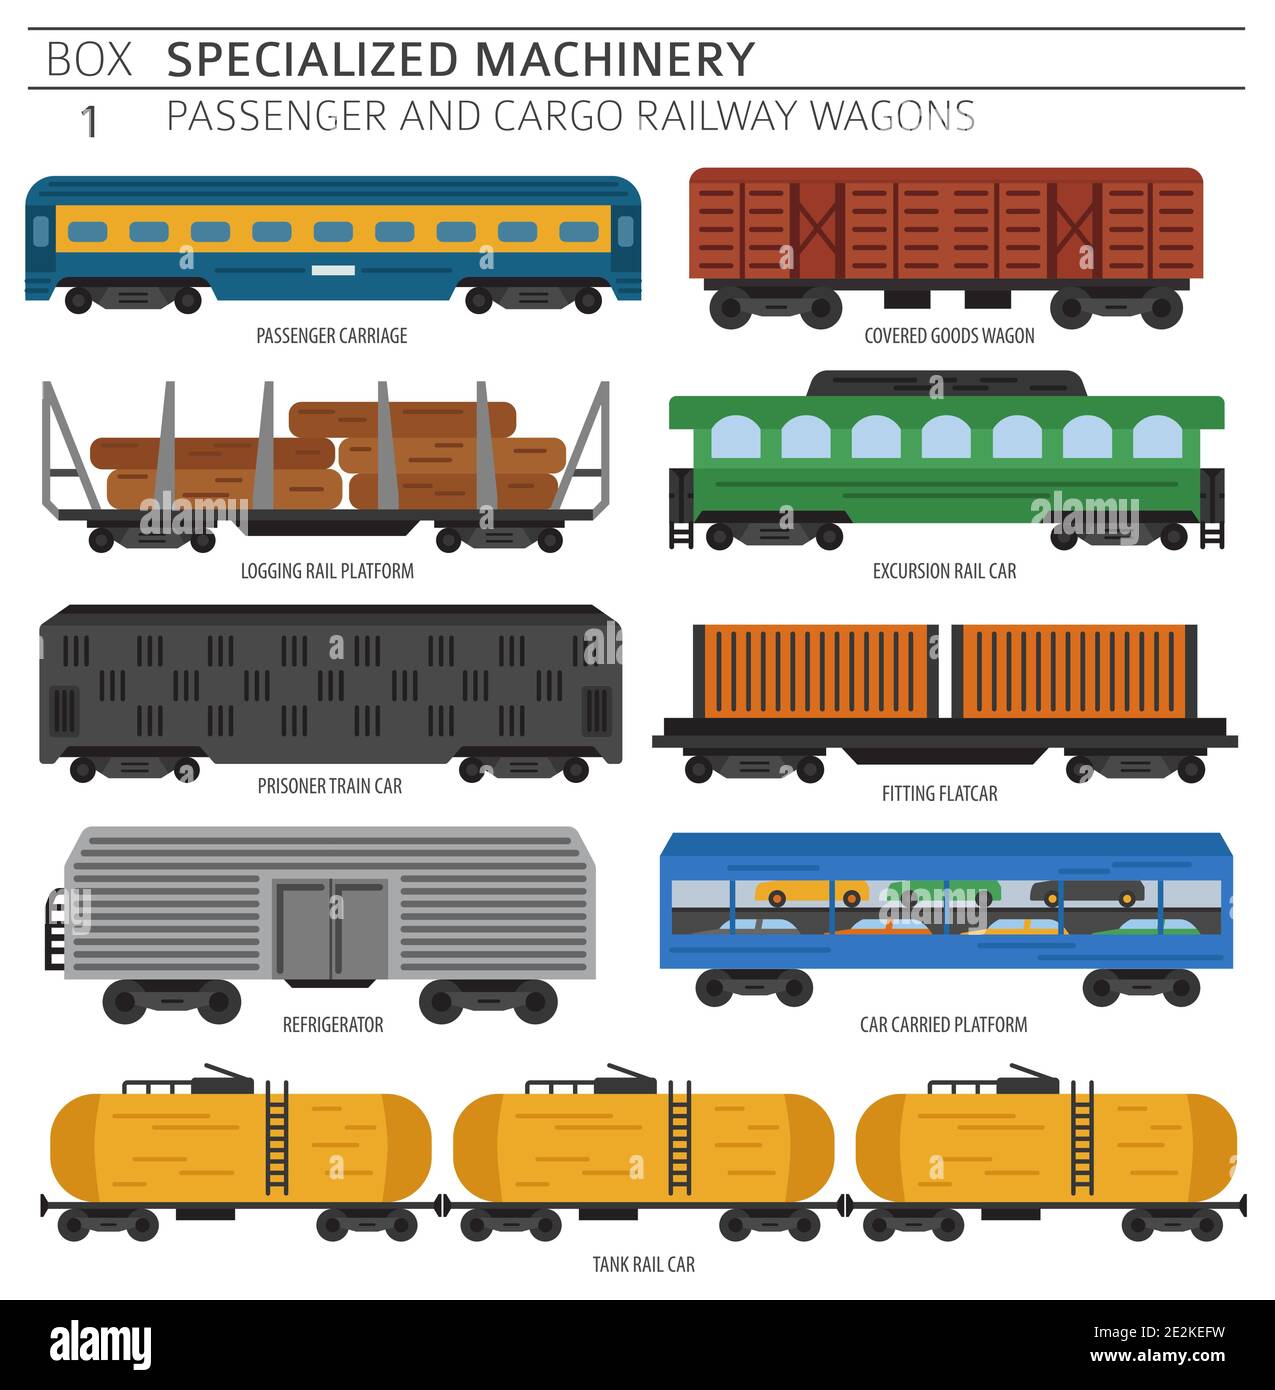 Special machinery collection. Passenger and cargo railway wagons vector icon set isolated on white. Illustration Stock Vector